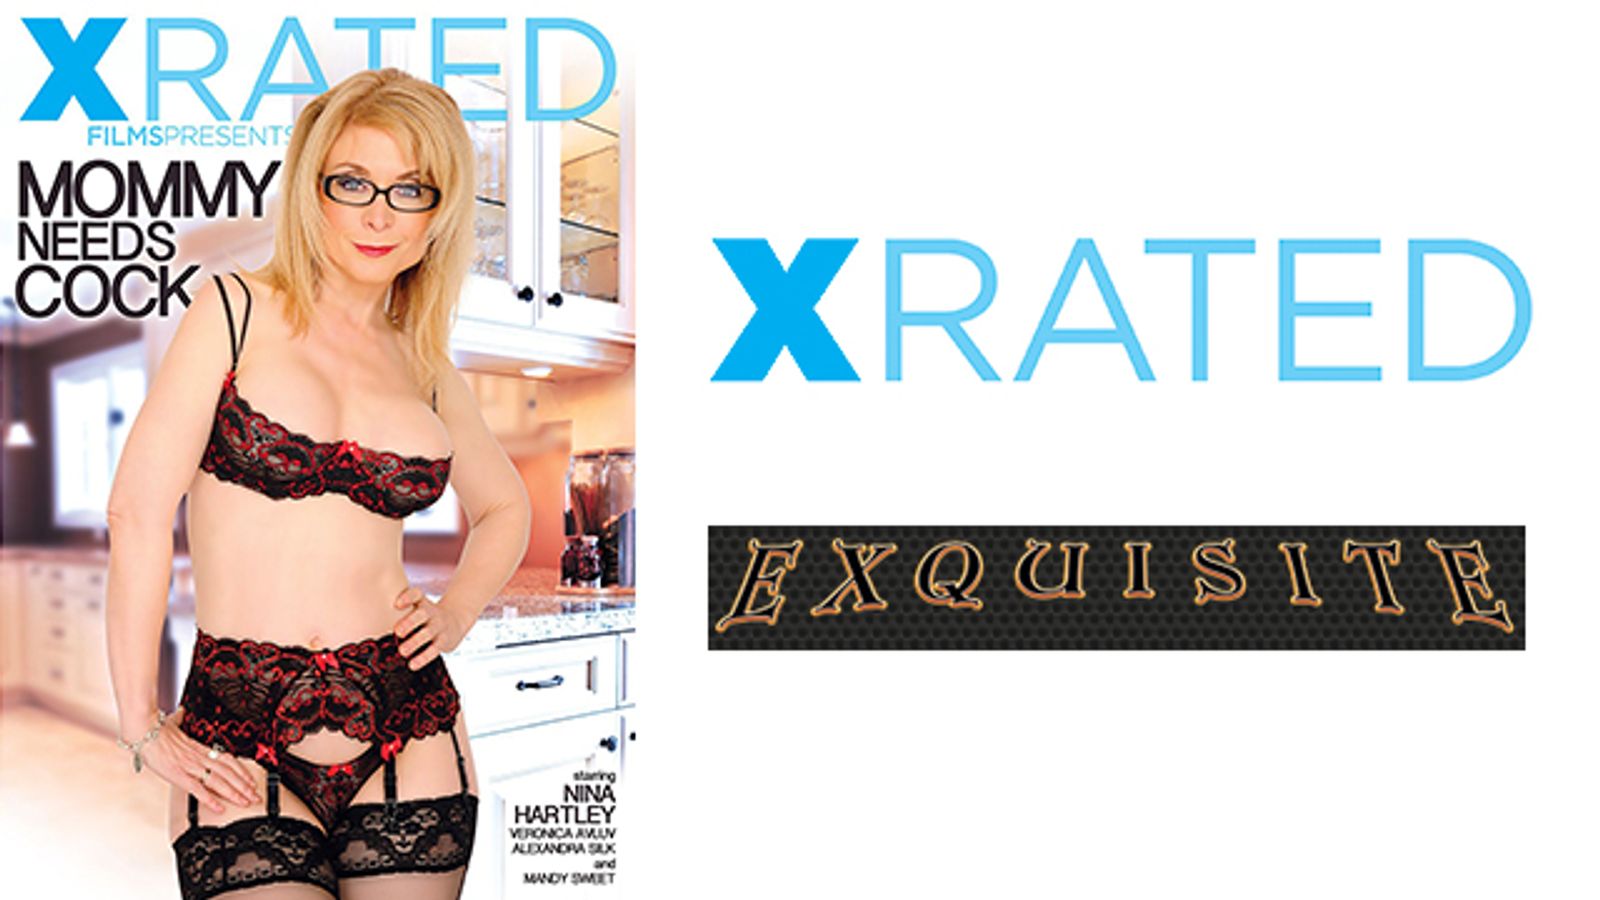 X-Rated Films Streets 'Mommy Needs Cock' Starring Nina Hartley